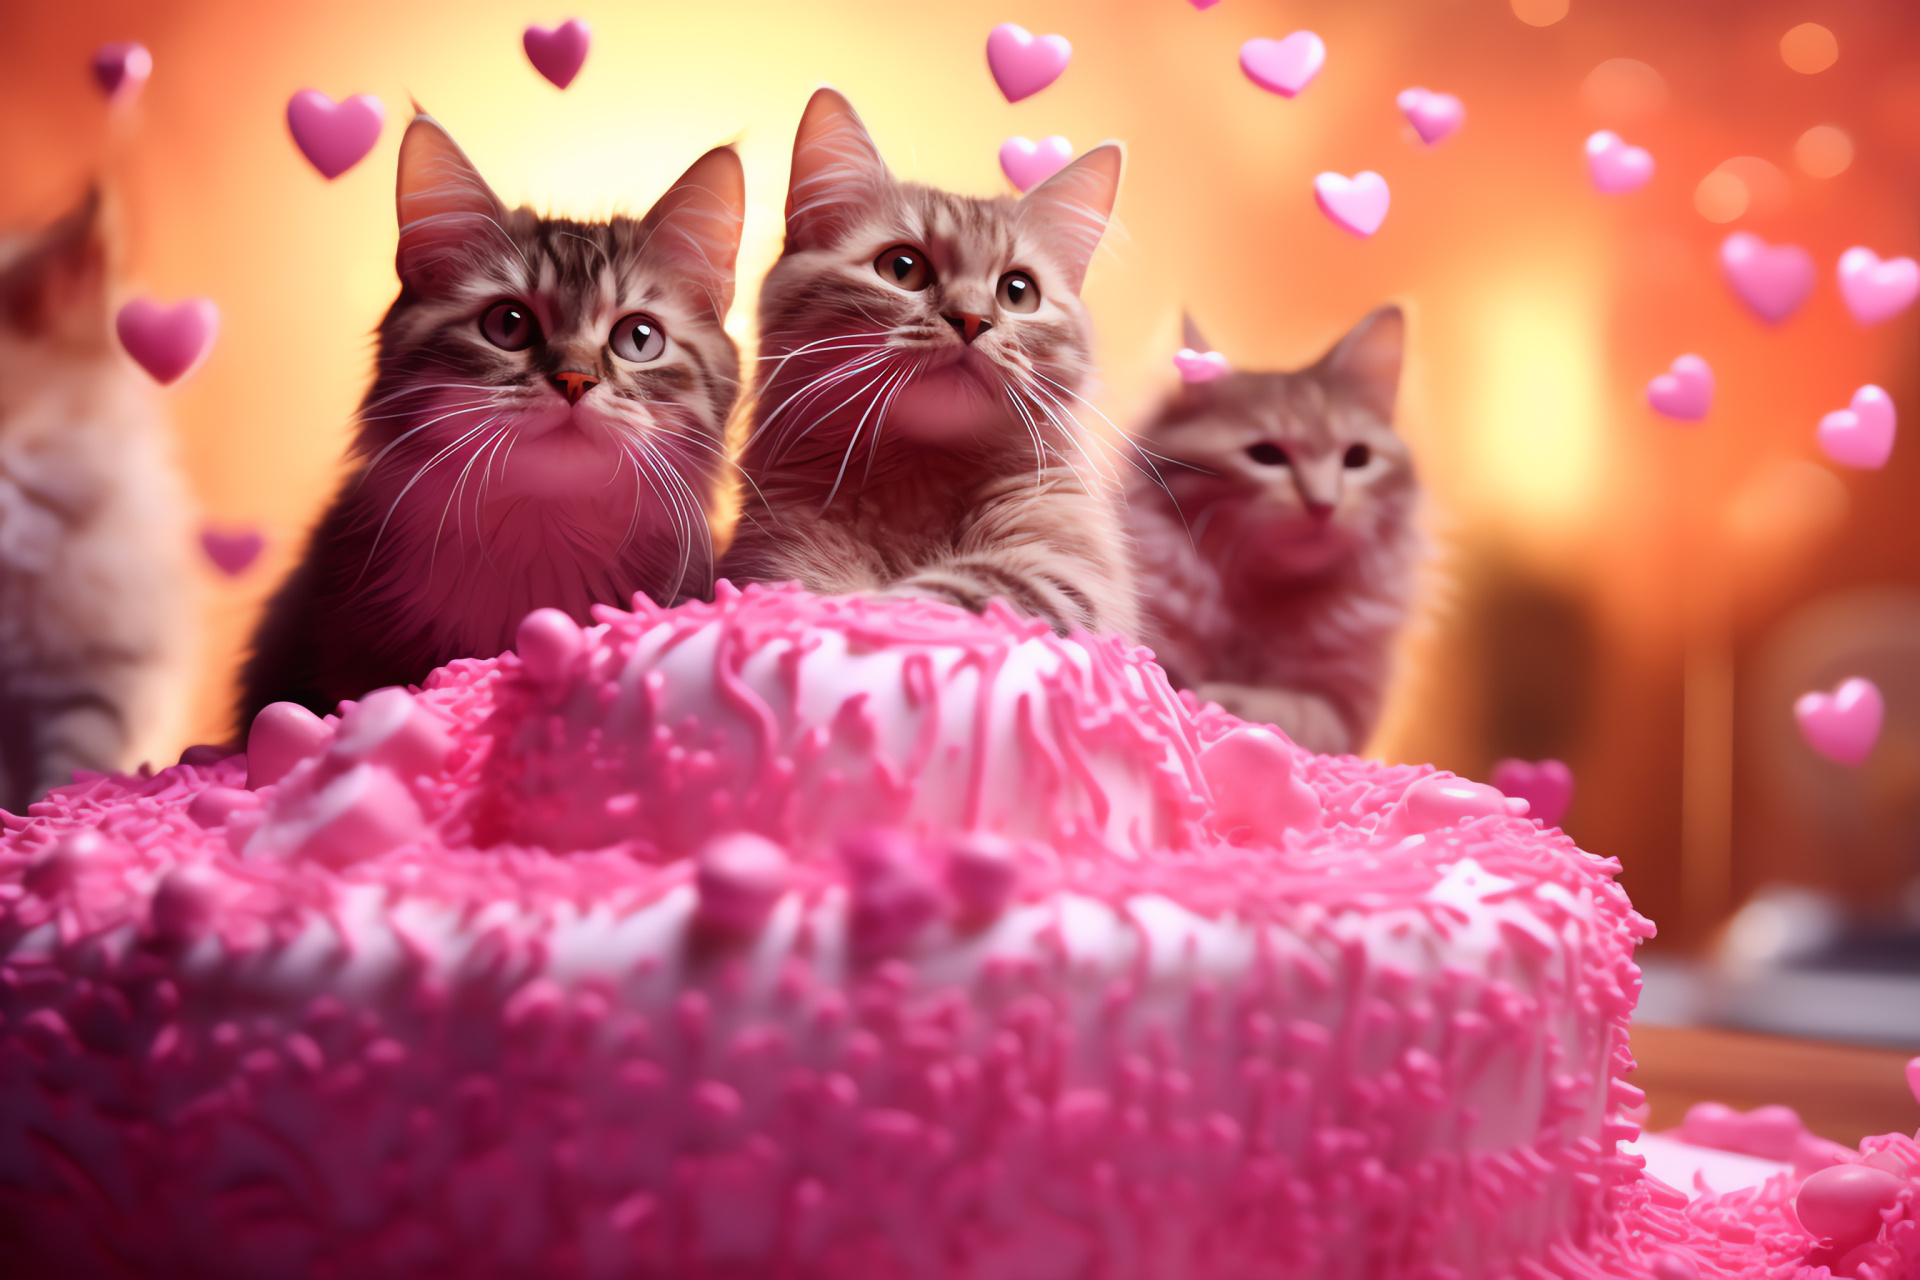 Lovable cats pastry, Baked delights, Sugary topping, Valentine's confections, Edible heart decorations, HD Desktop Image